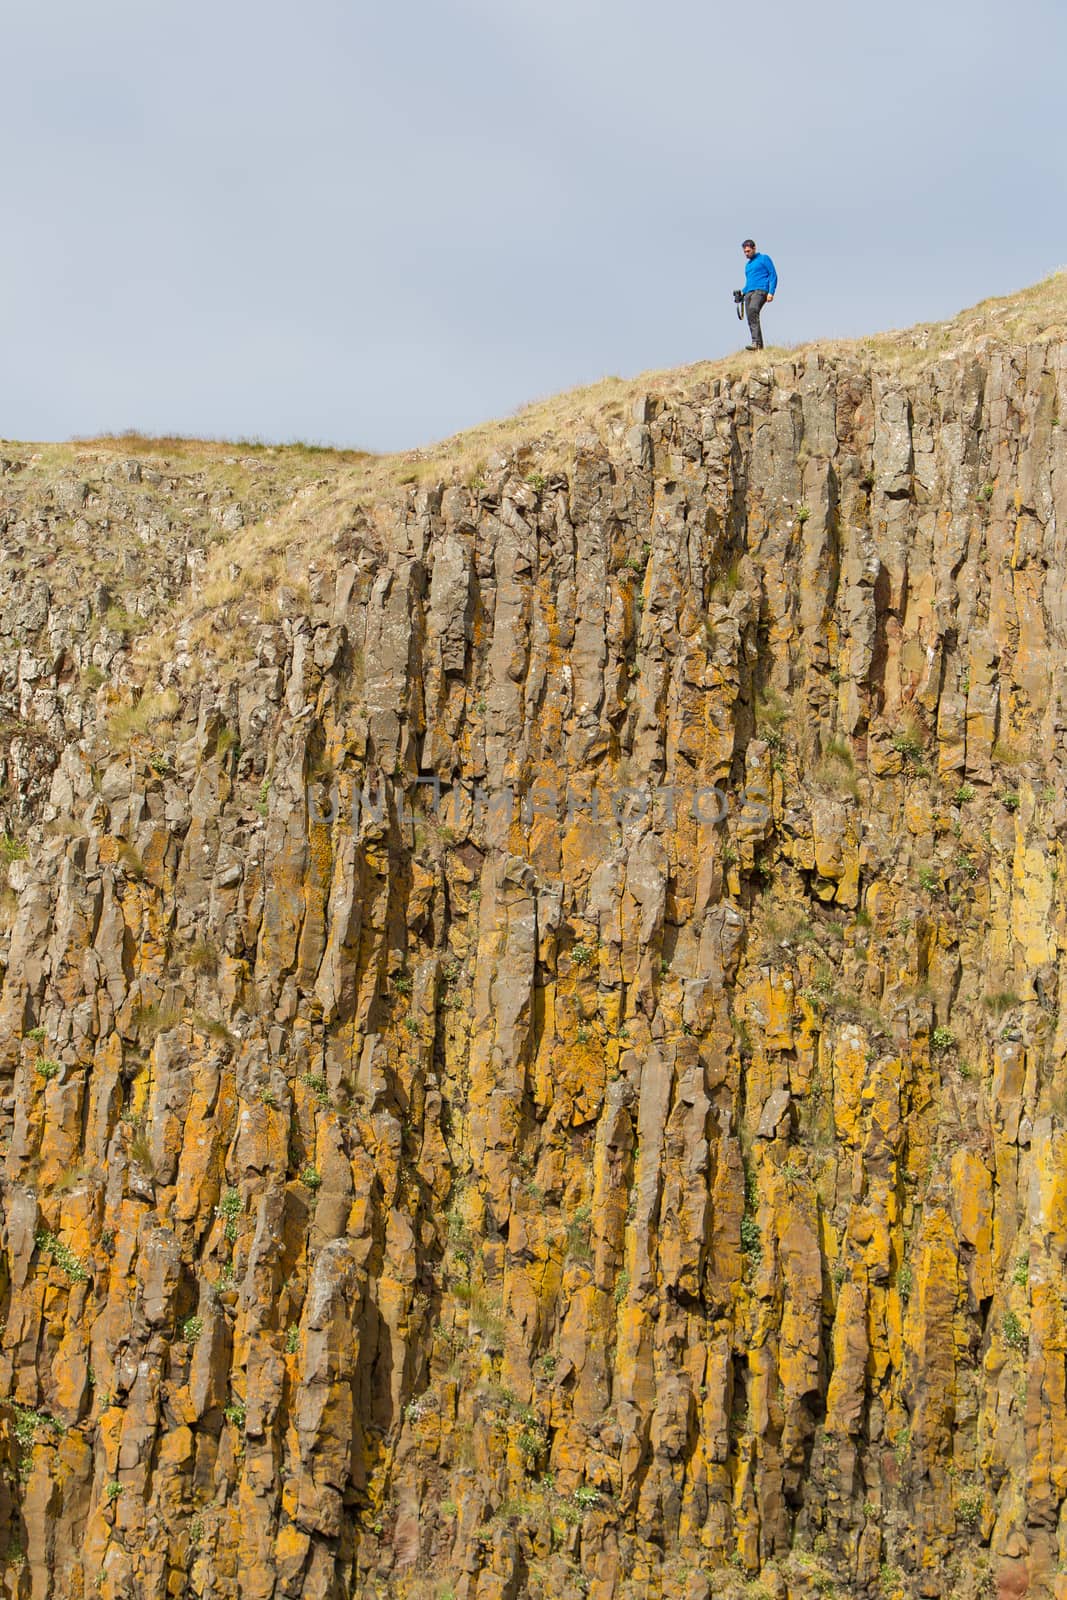 Man on the edge of the cliff - Iceland by michaklootwijk